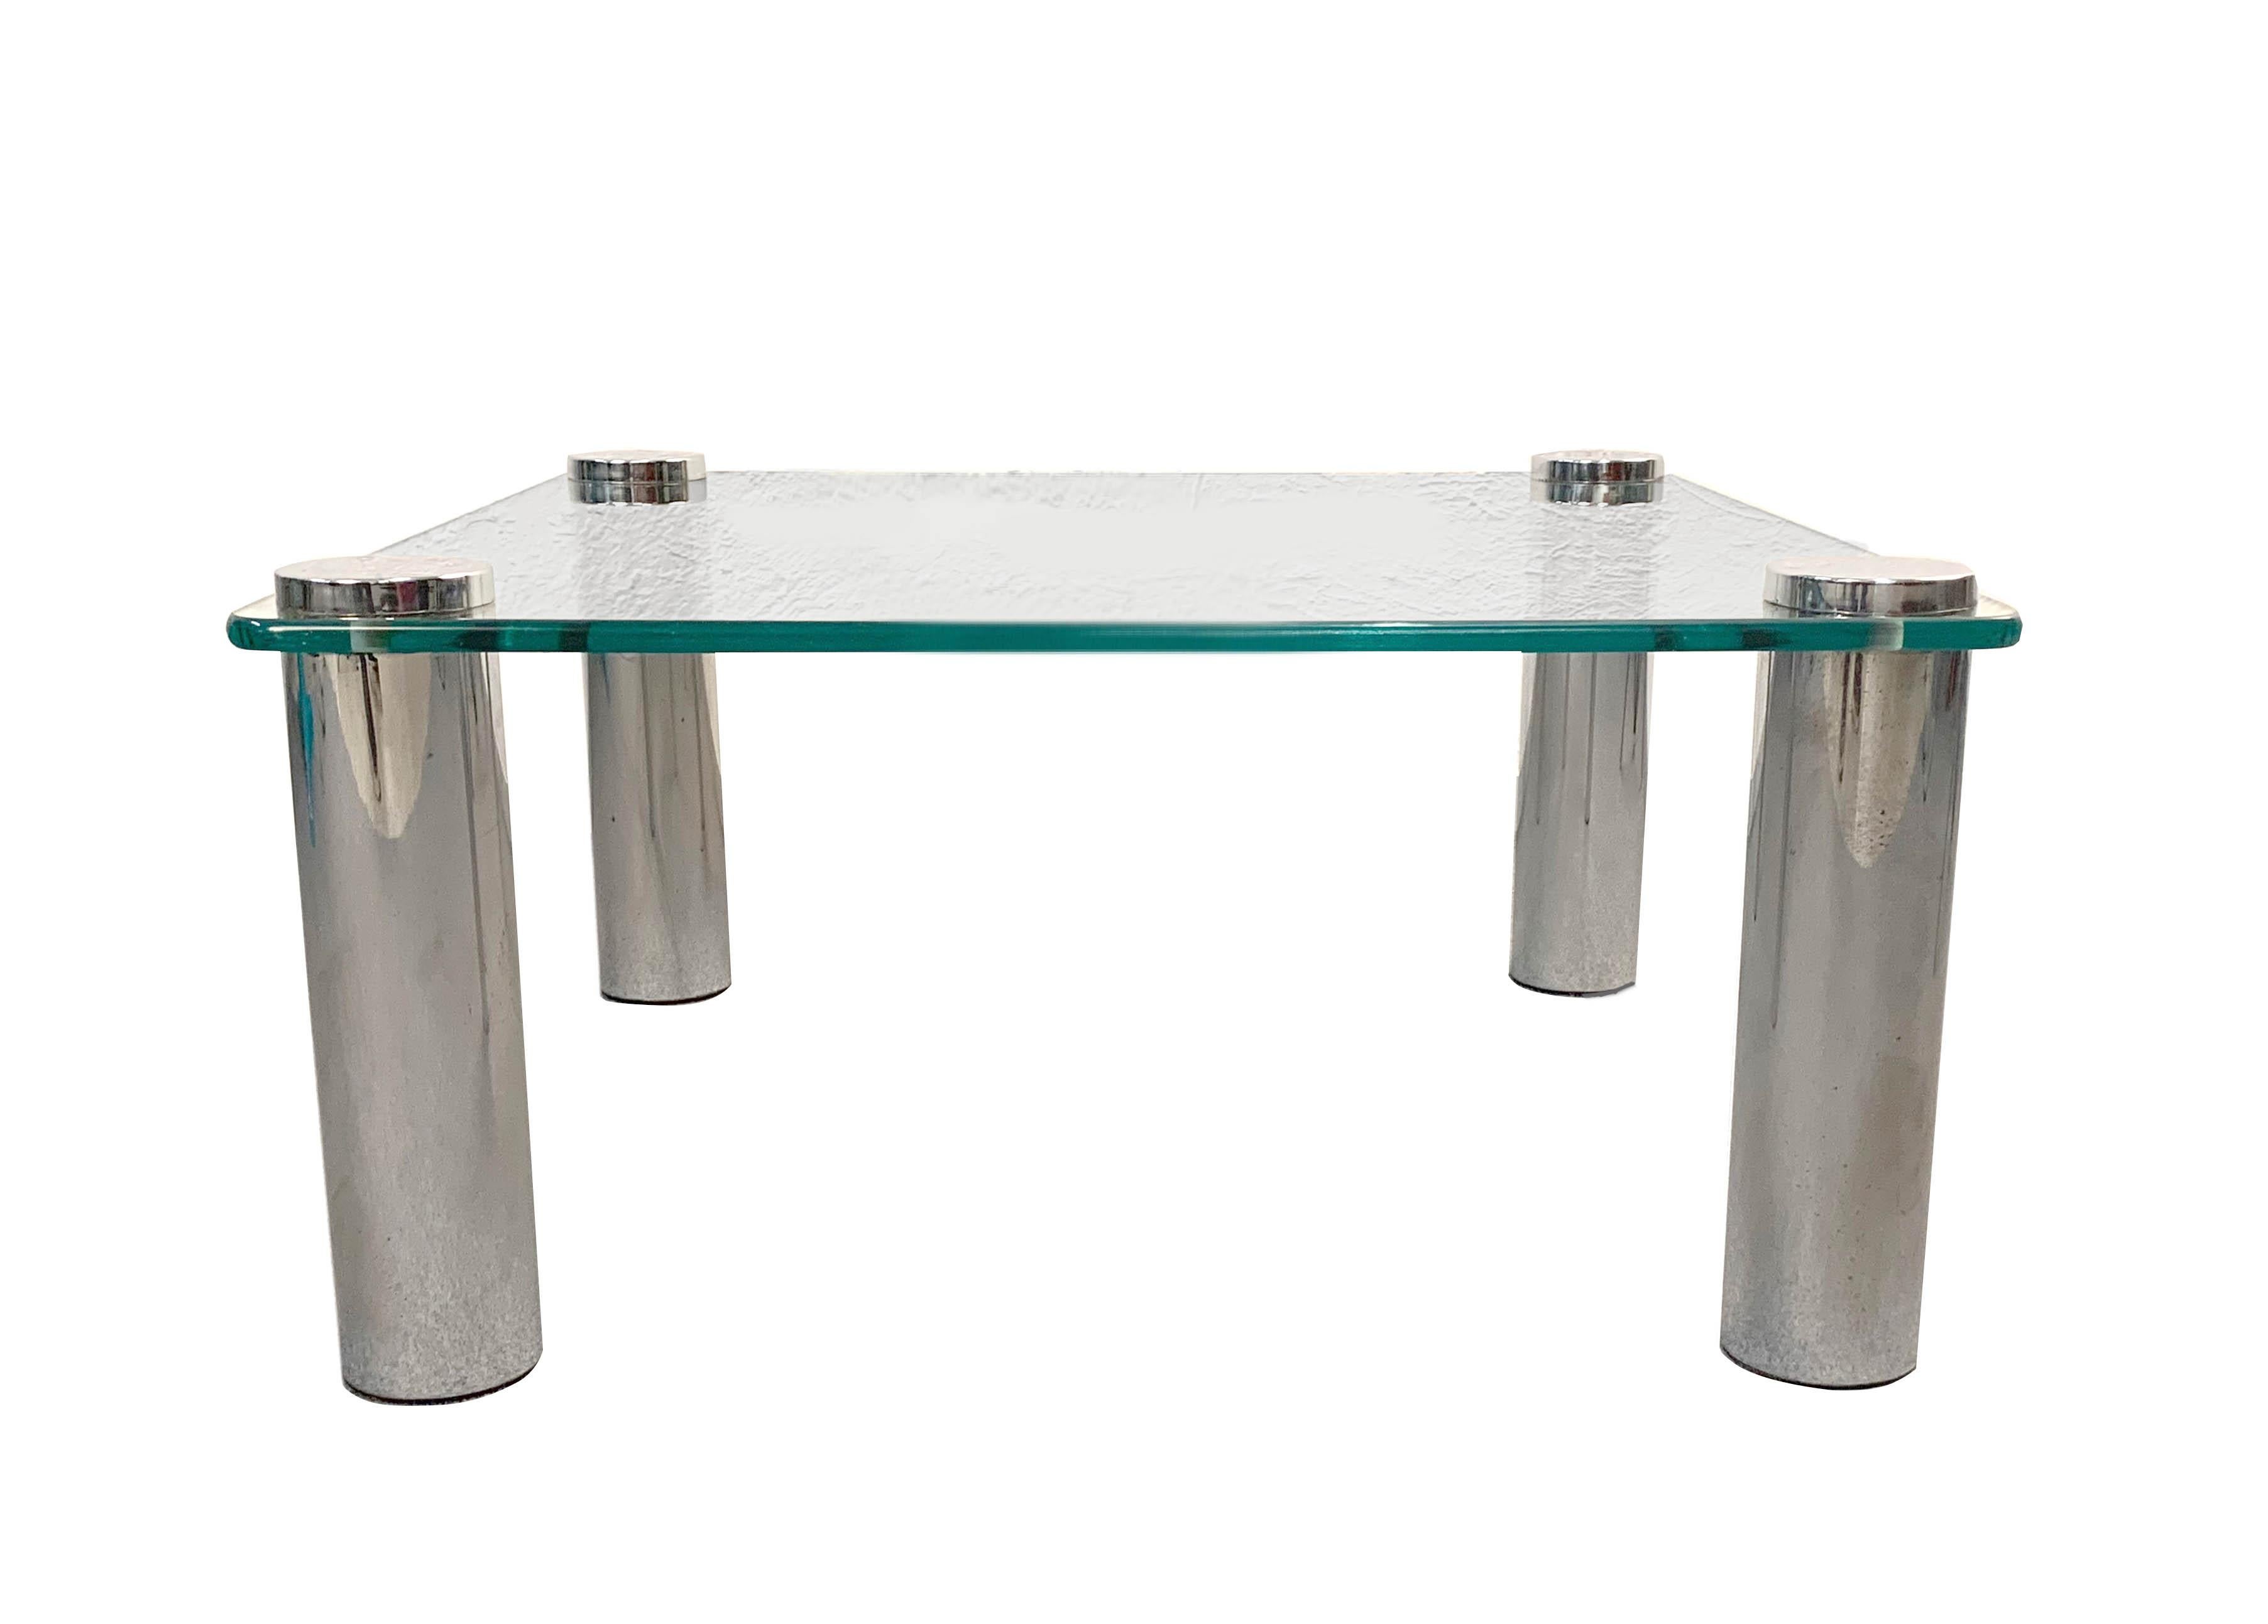 Marco Zanuso square coffee table for Zanotta. Italy, 1960s. Chrome-plated glass top.
Measures: 67.5 x 67.5 x 32 cm in height.